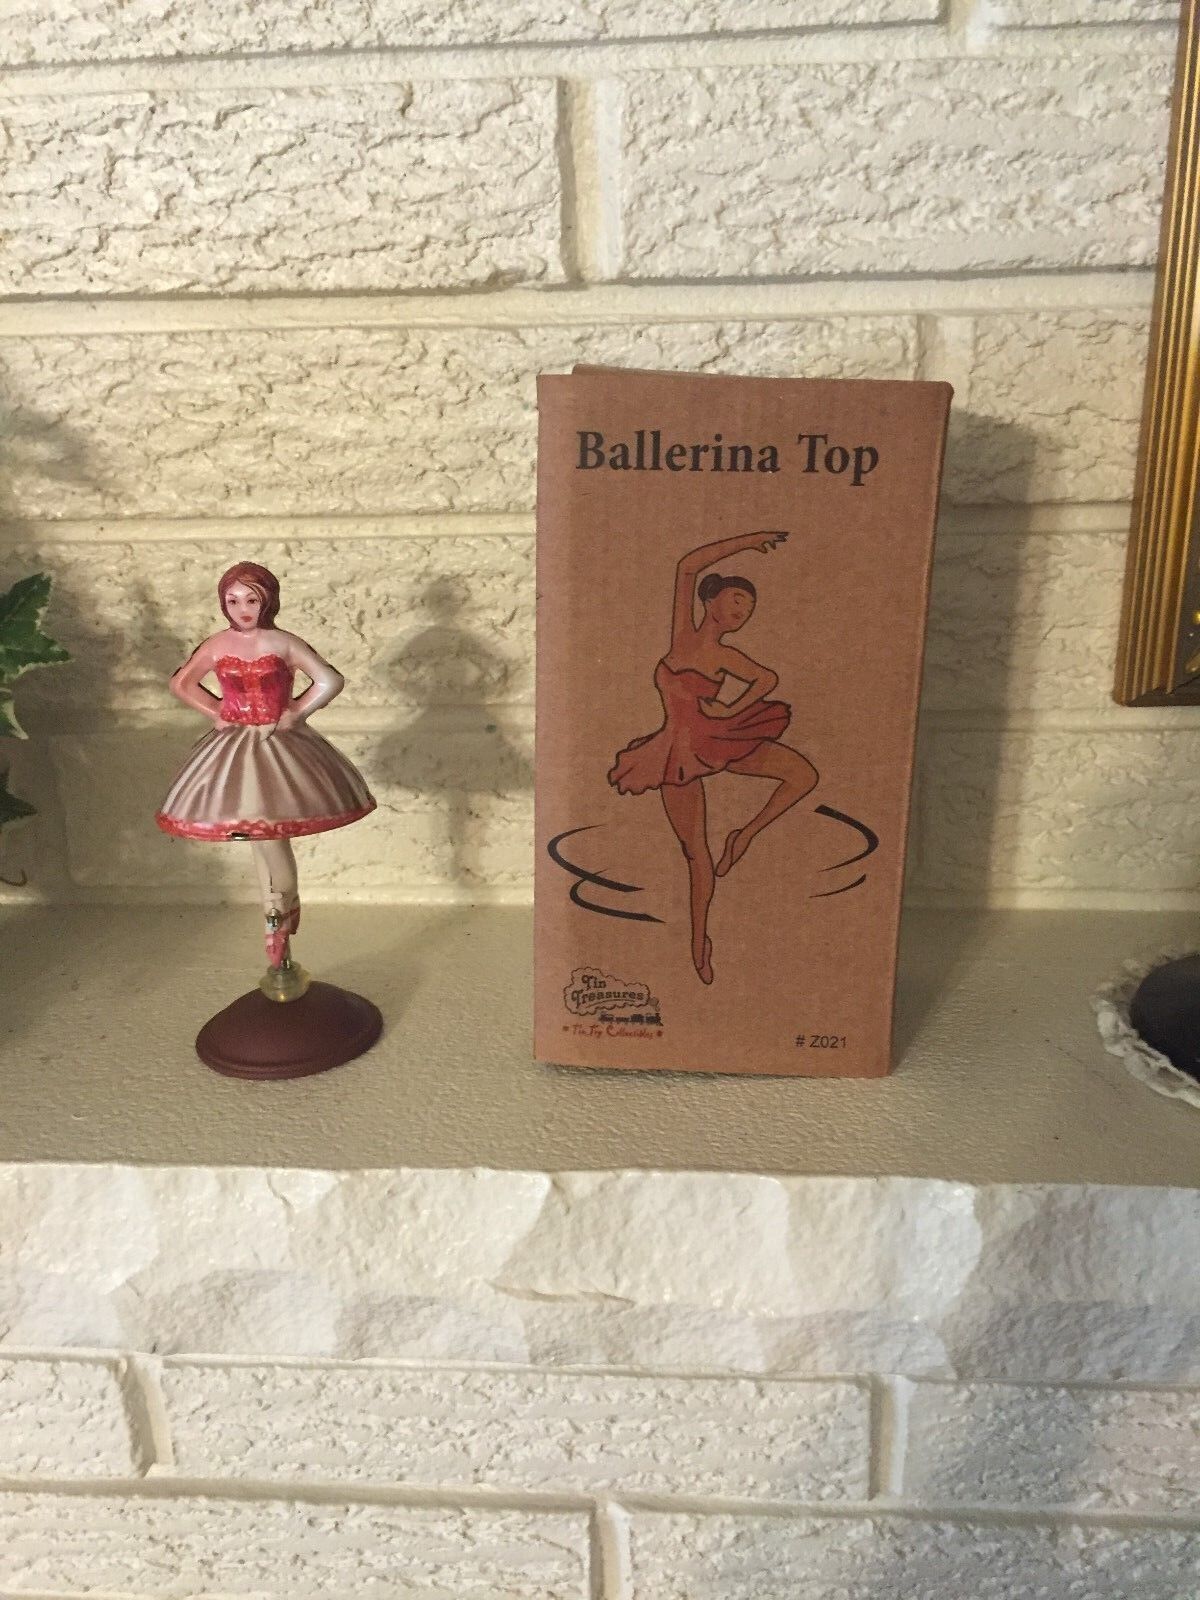 Bella Ballerina Spinning Tin Litho Toy Top Spins In Her Pretty Dress Dl